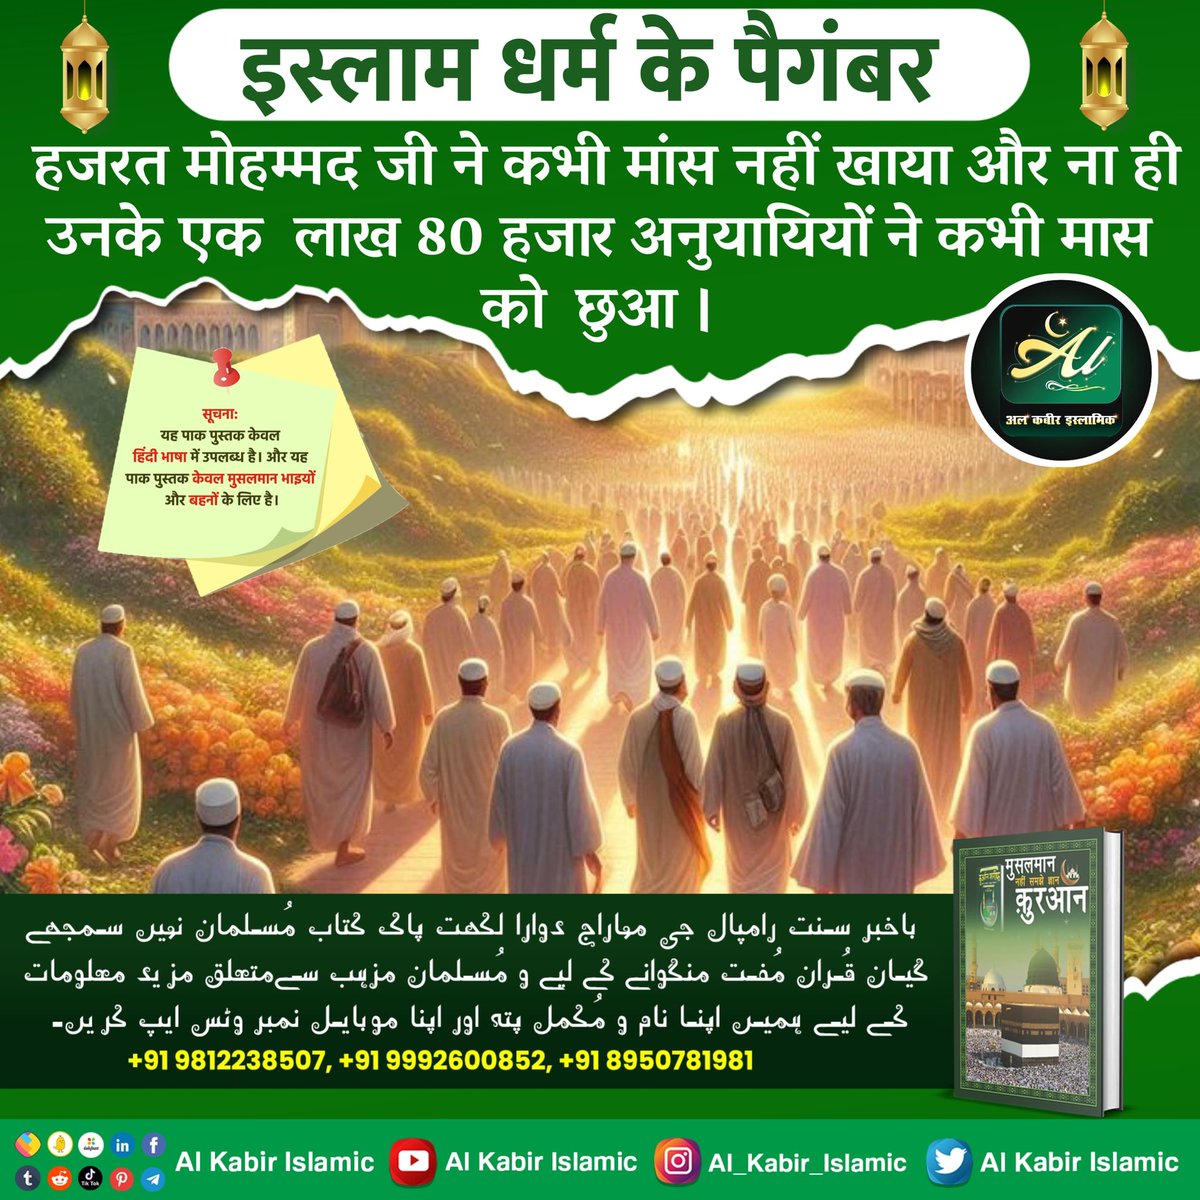 #GodMorningFriday
Hazrat Mohammad Ji was a vegetarian!
The Prophet of Islam, Hazrat Mohammad Ji never ate meat, nor did his 1 lakh 80 thousand followers ever touch meat.
To know more, must read the sacred book 'Muslman Nahi Samjhe Gyan Quran'
#fridaymorning